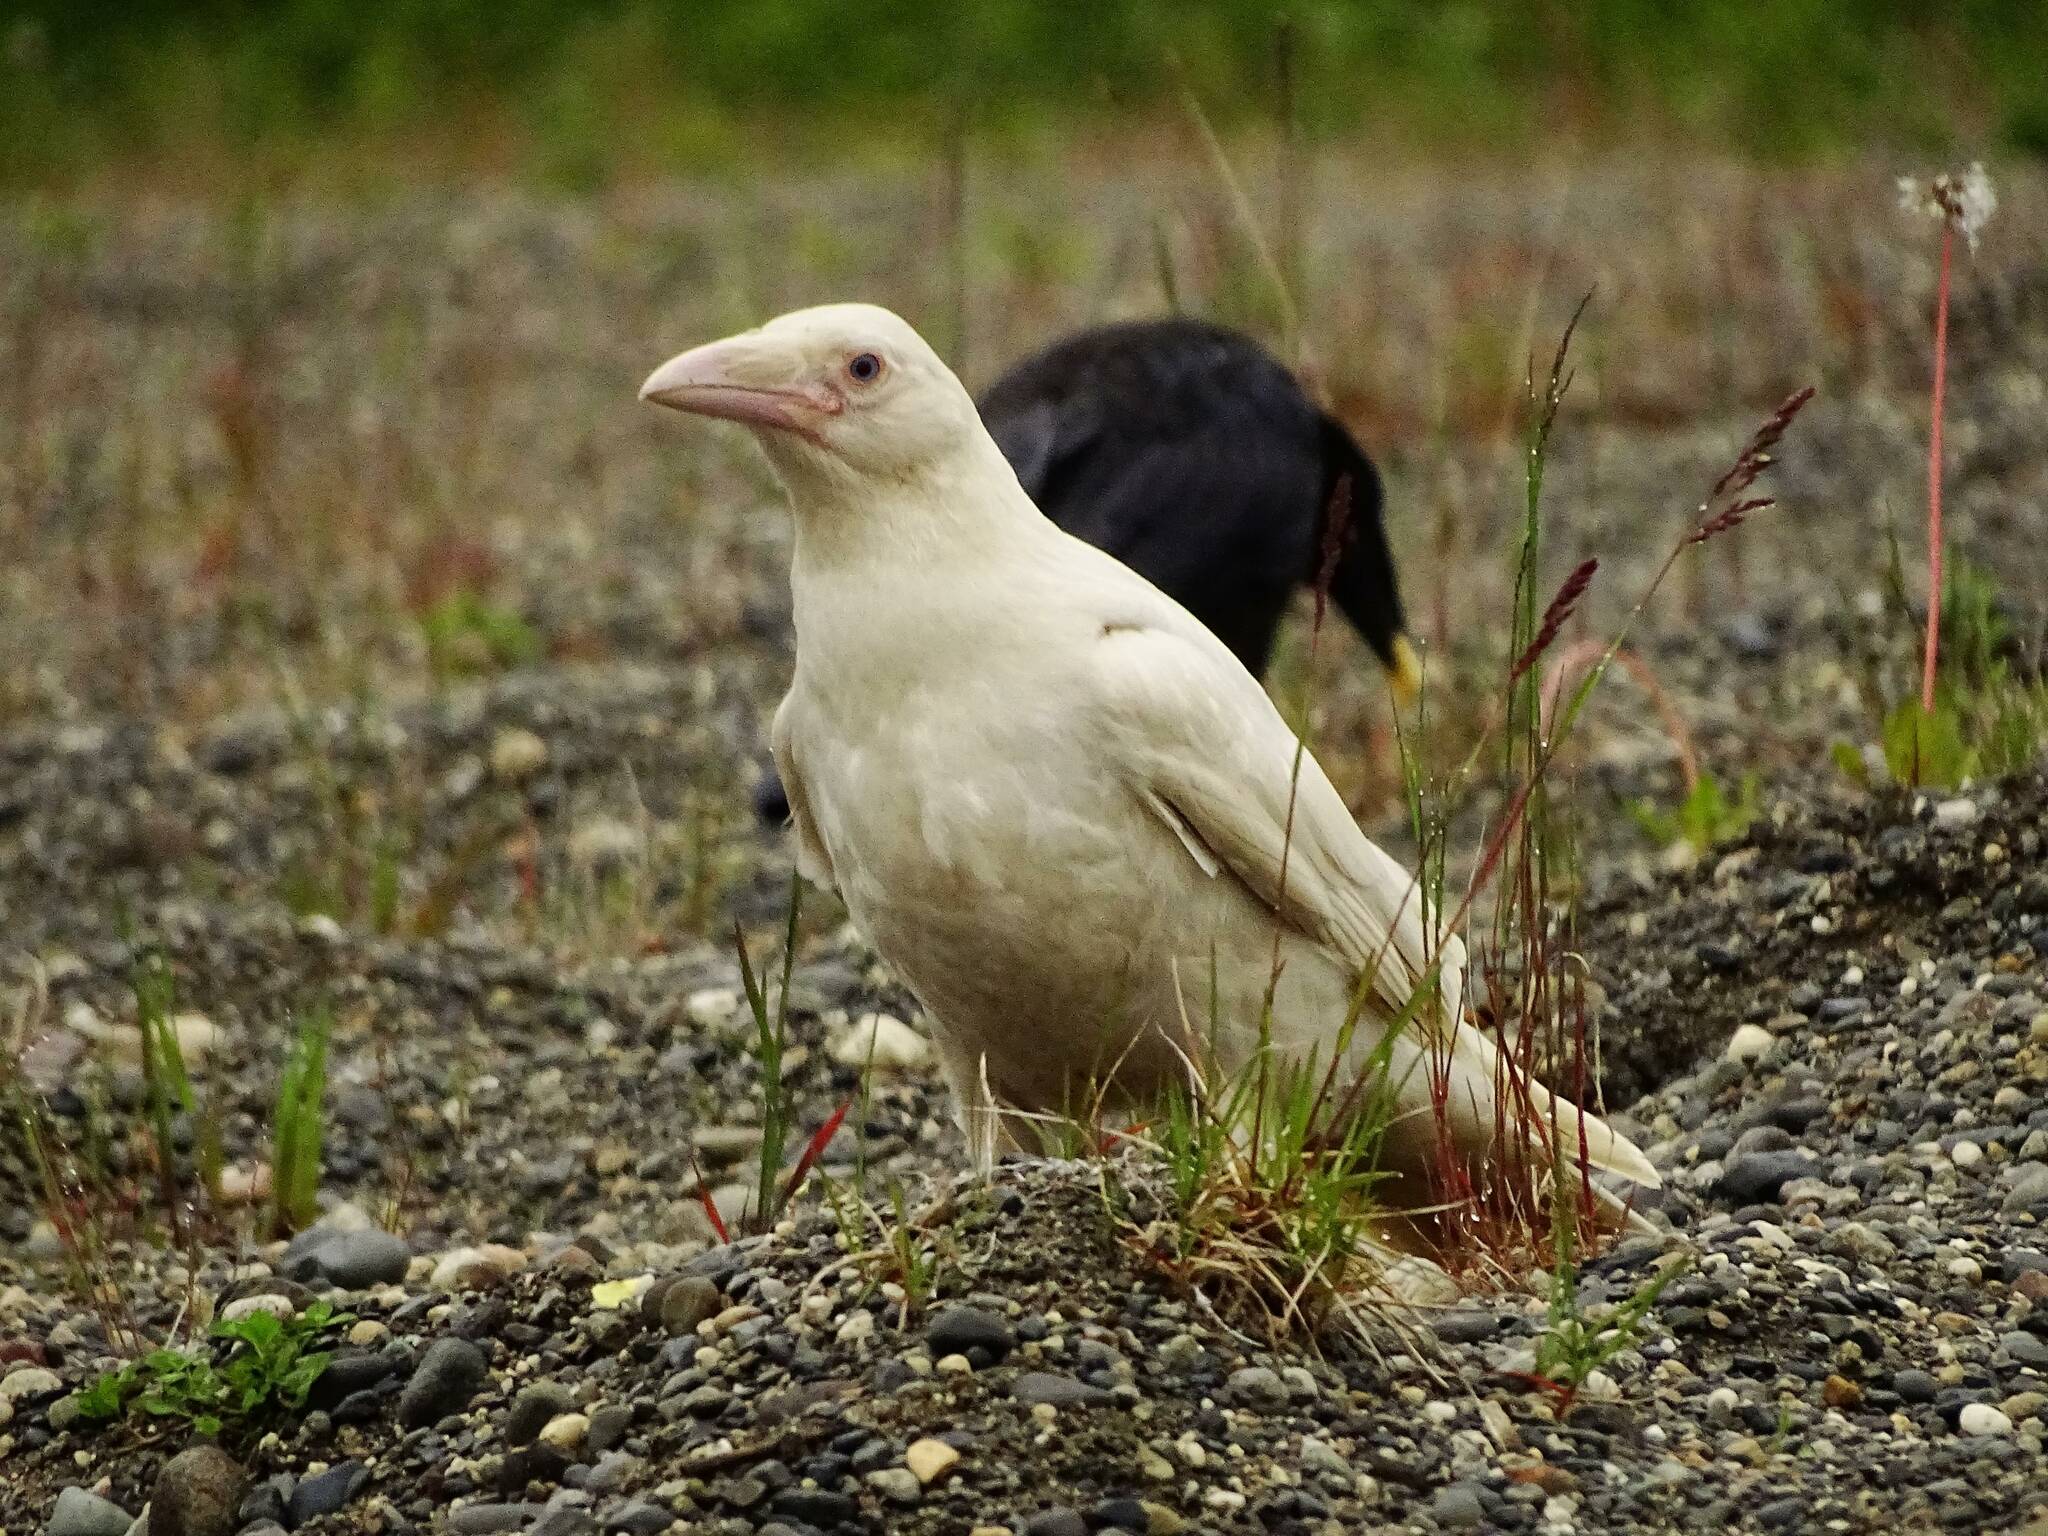 A leucistic raven, distinct for its white coloration, is photographed north of Kenai. (Photo courtesy Gregory Messimer)